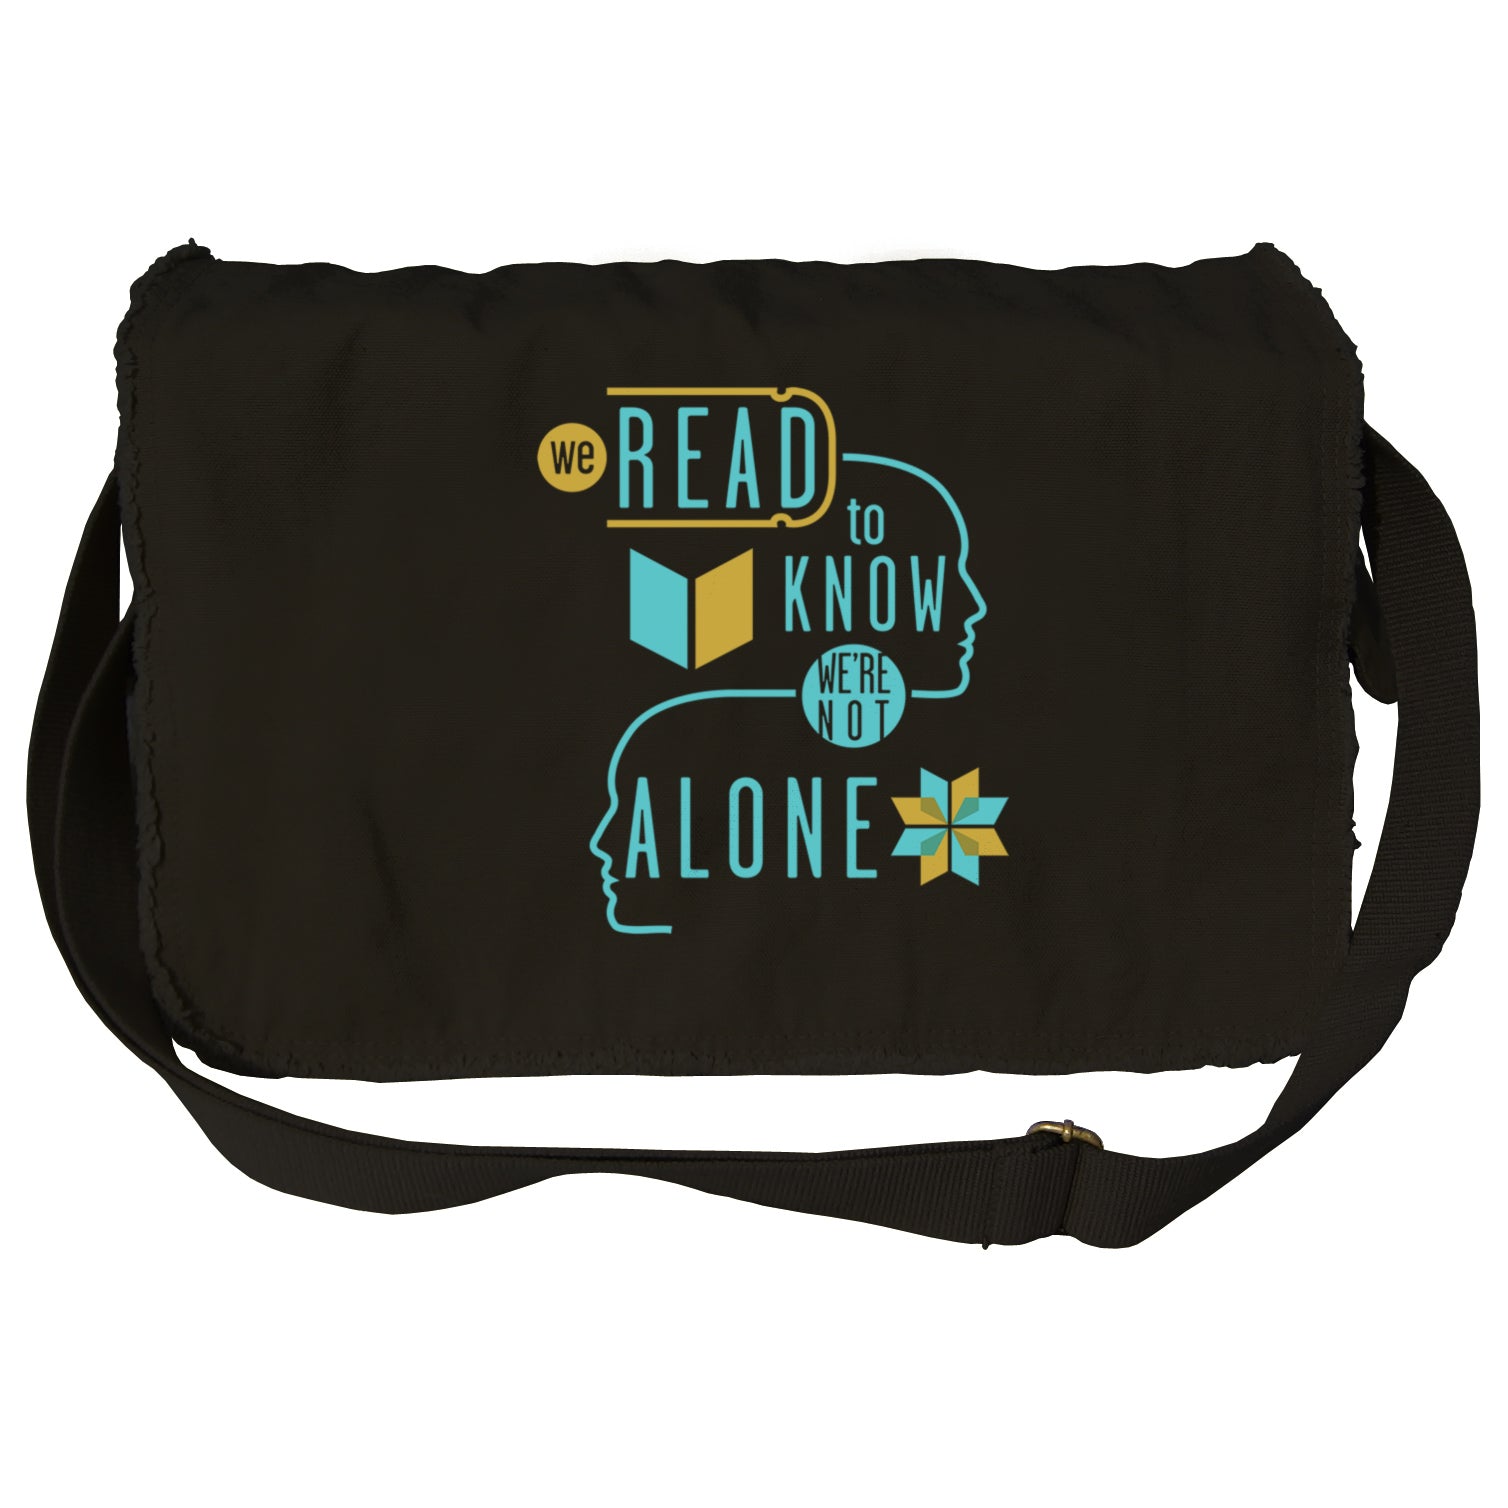 We Read to Know We are Not Alone Messenger Bag